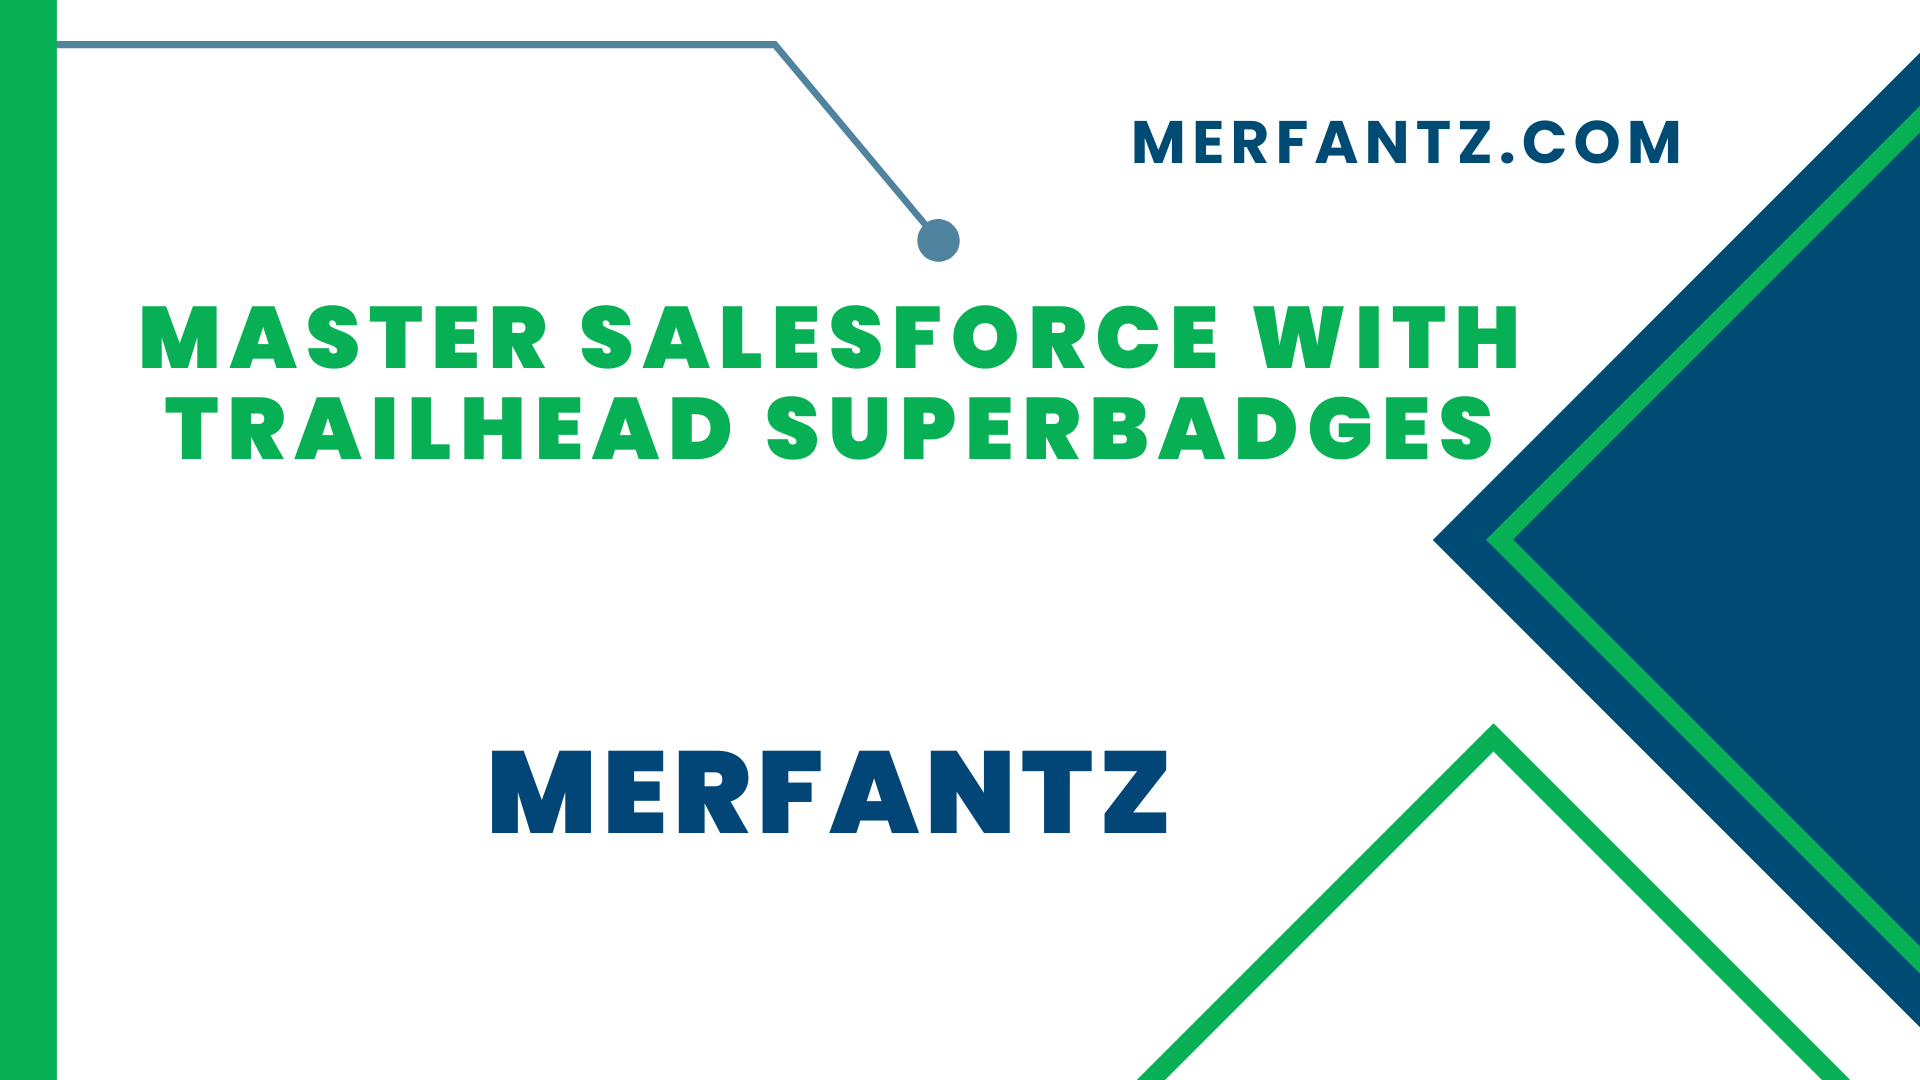 Master Salesforce with Trailhead Superbadges